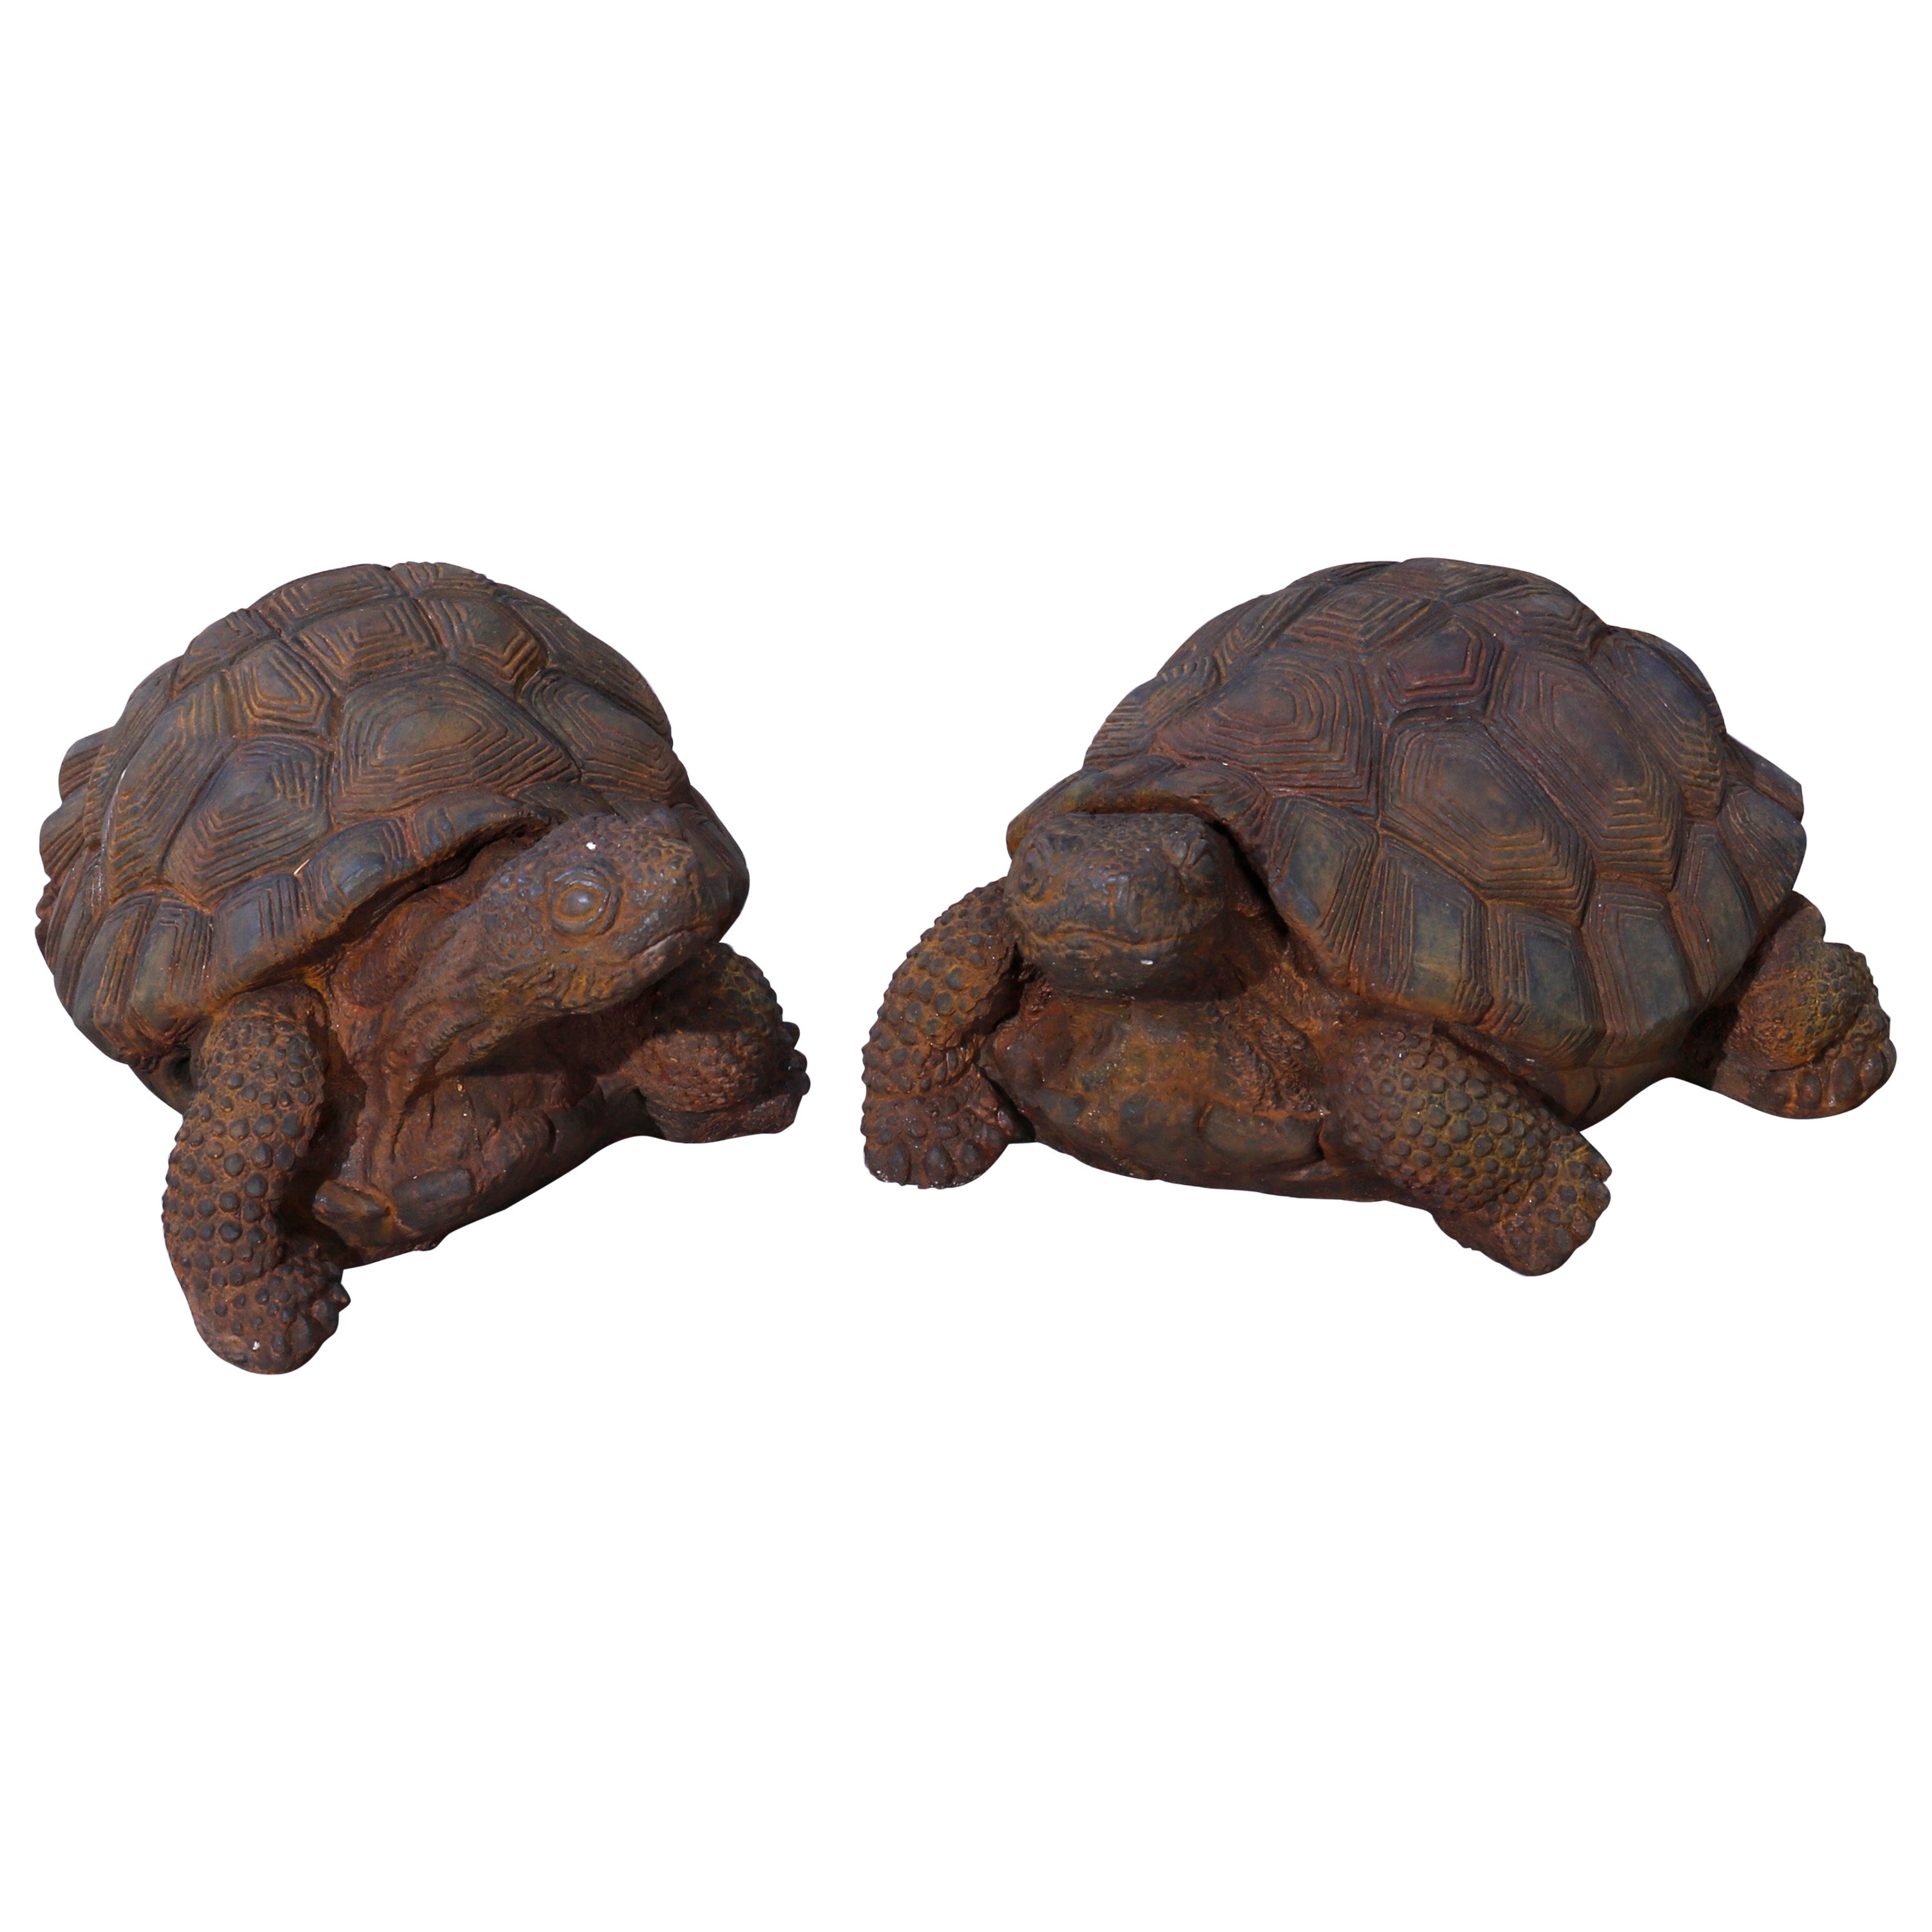 Pair Life Size Cast Hard Stone Tortoise Garden Statues in Bronzed Finish, 20th C